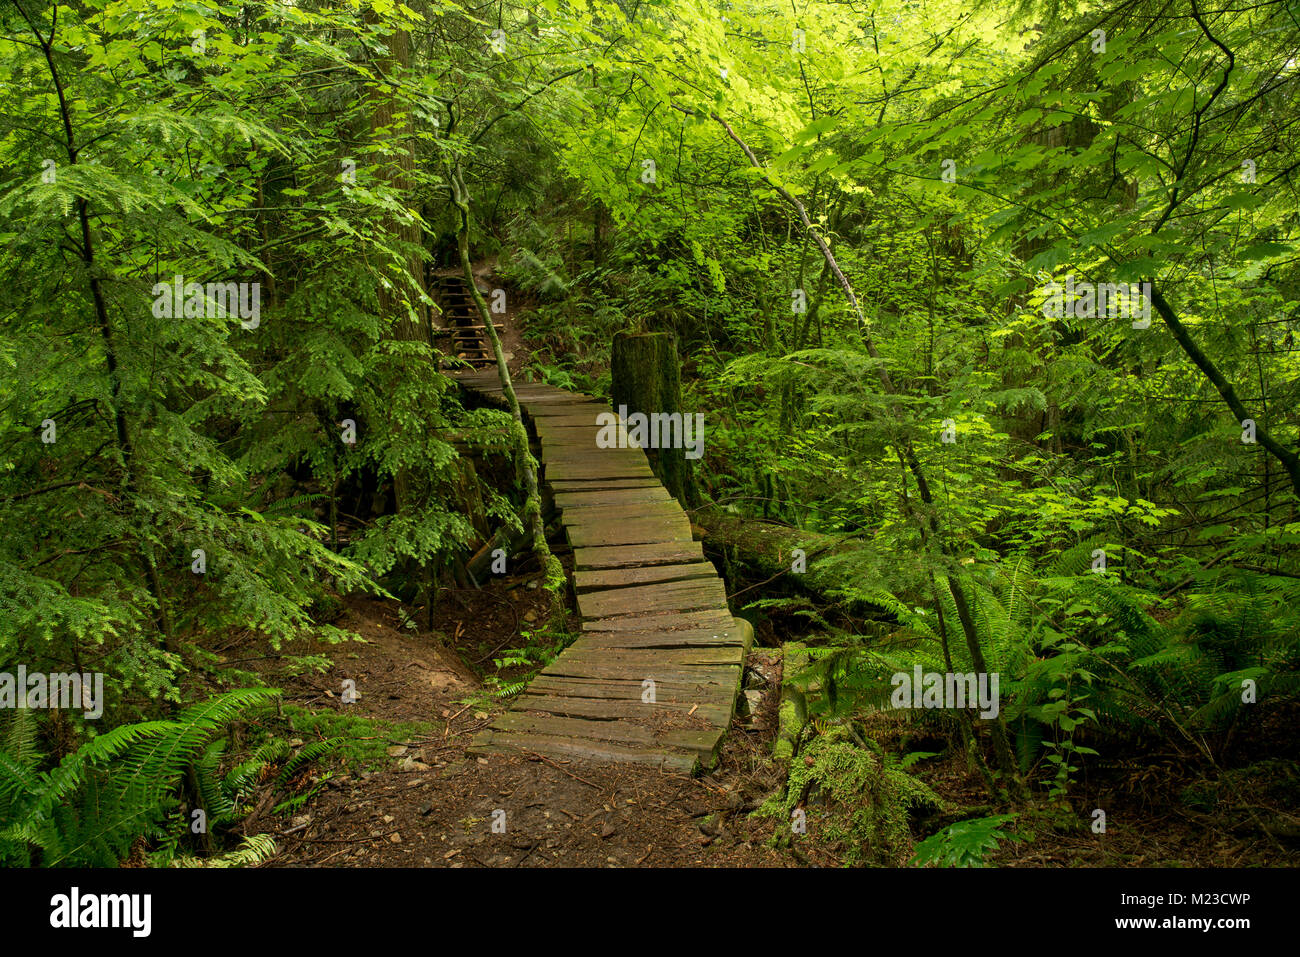 Wooden foot bridge in a forest north of Abbotsford, British Columbia, Canada Stock Photo